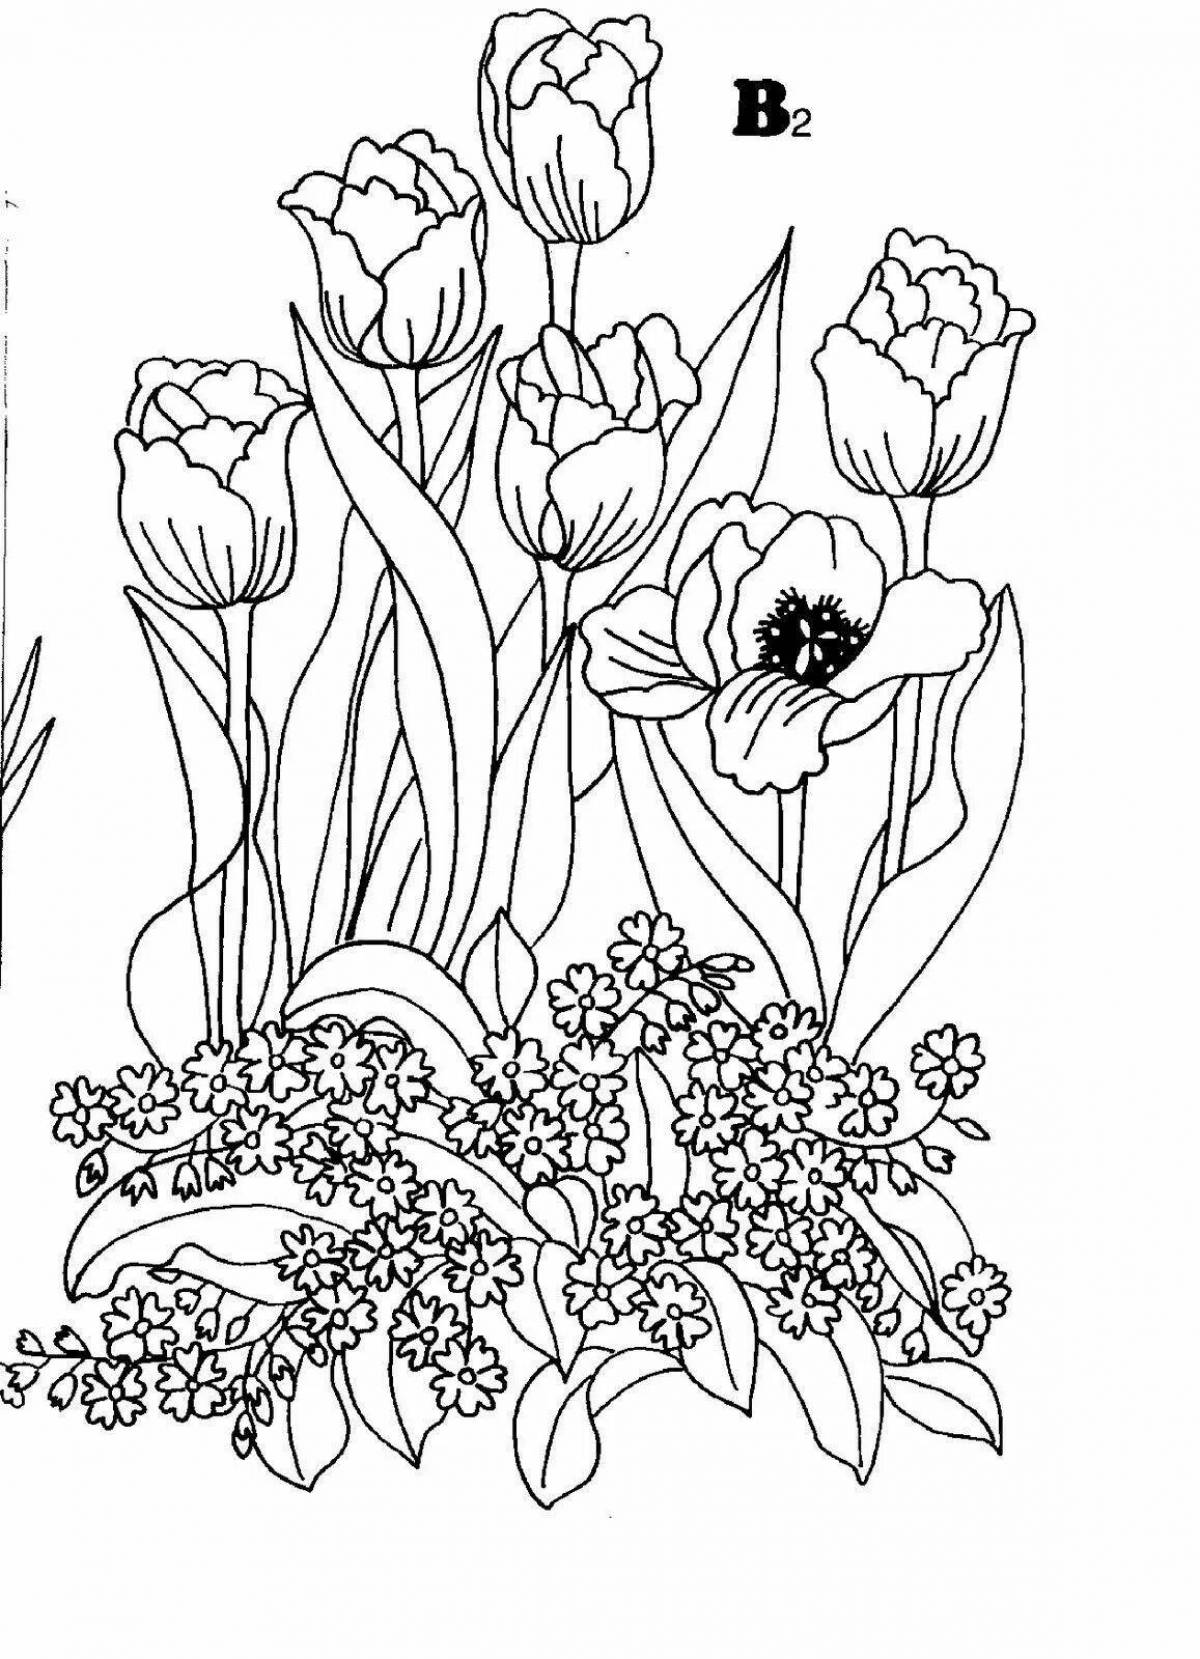 Colorful composition coloring book